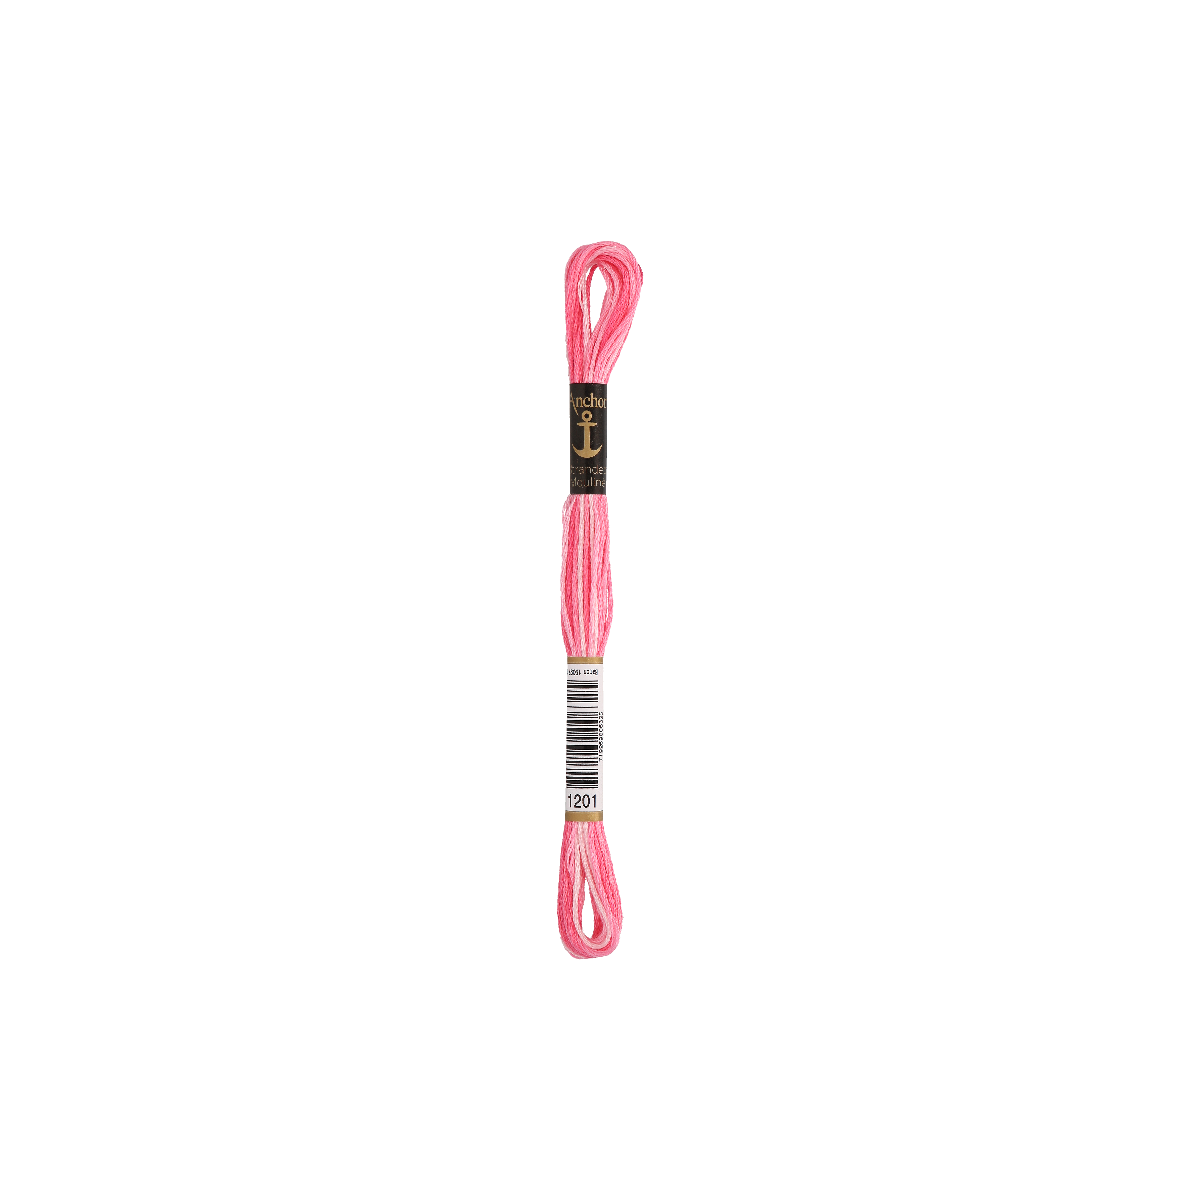 Anchor Sticktwist 8m, rosa ombre, Baumwolle, Farbe 1201,...